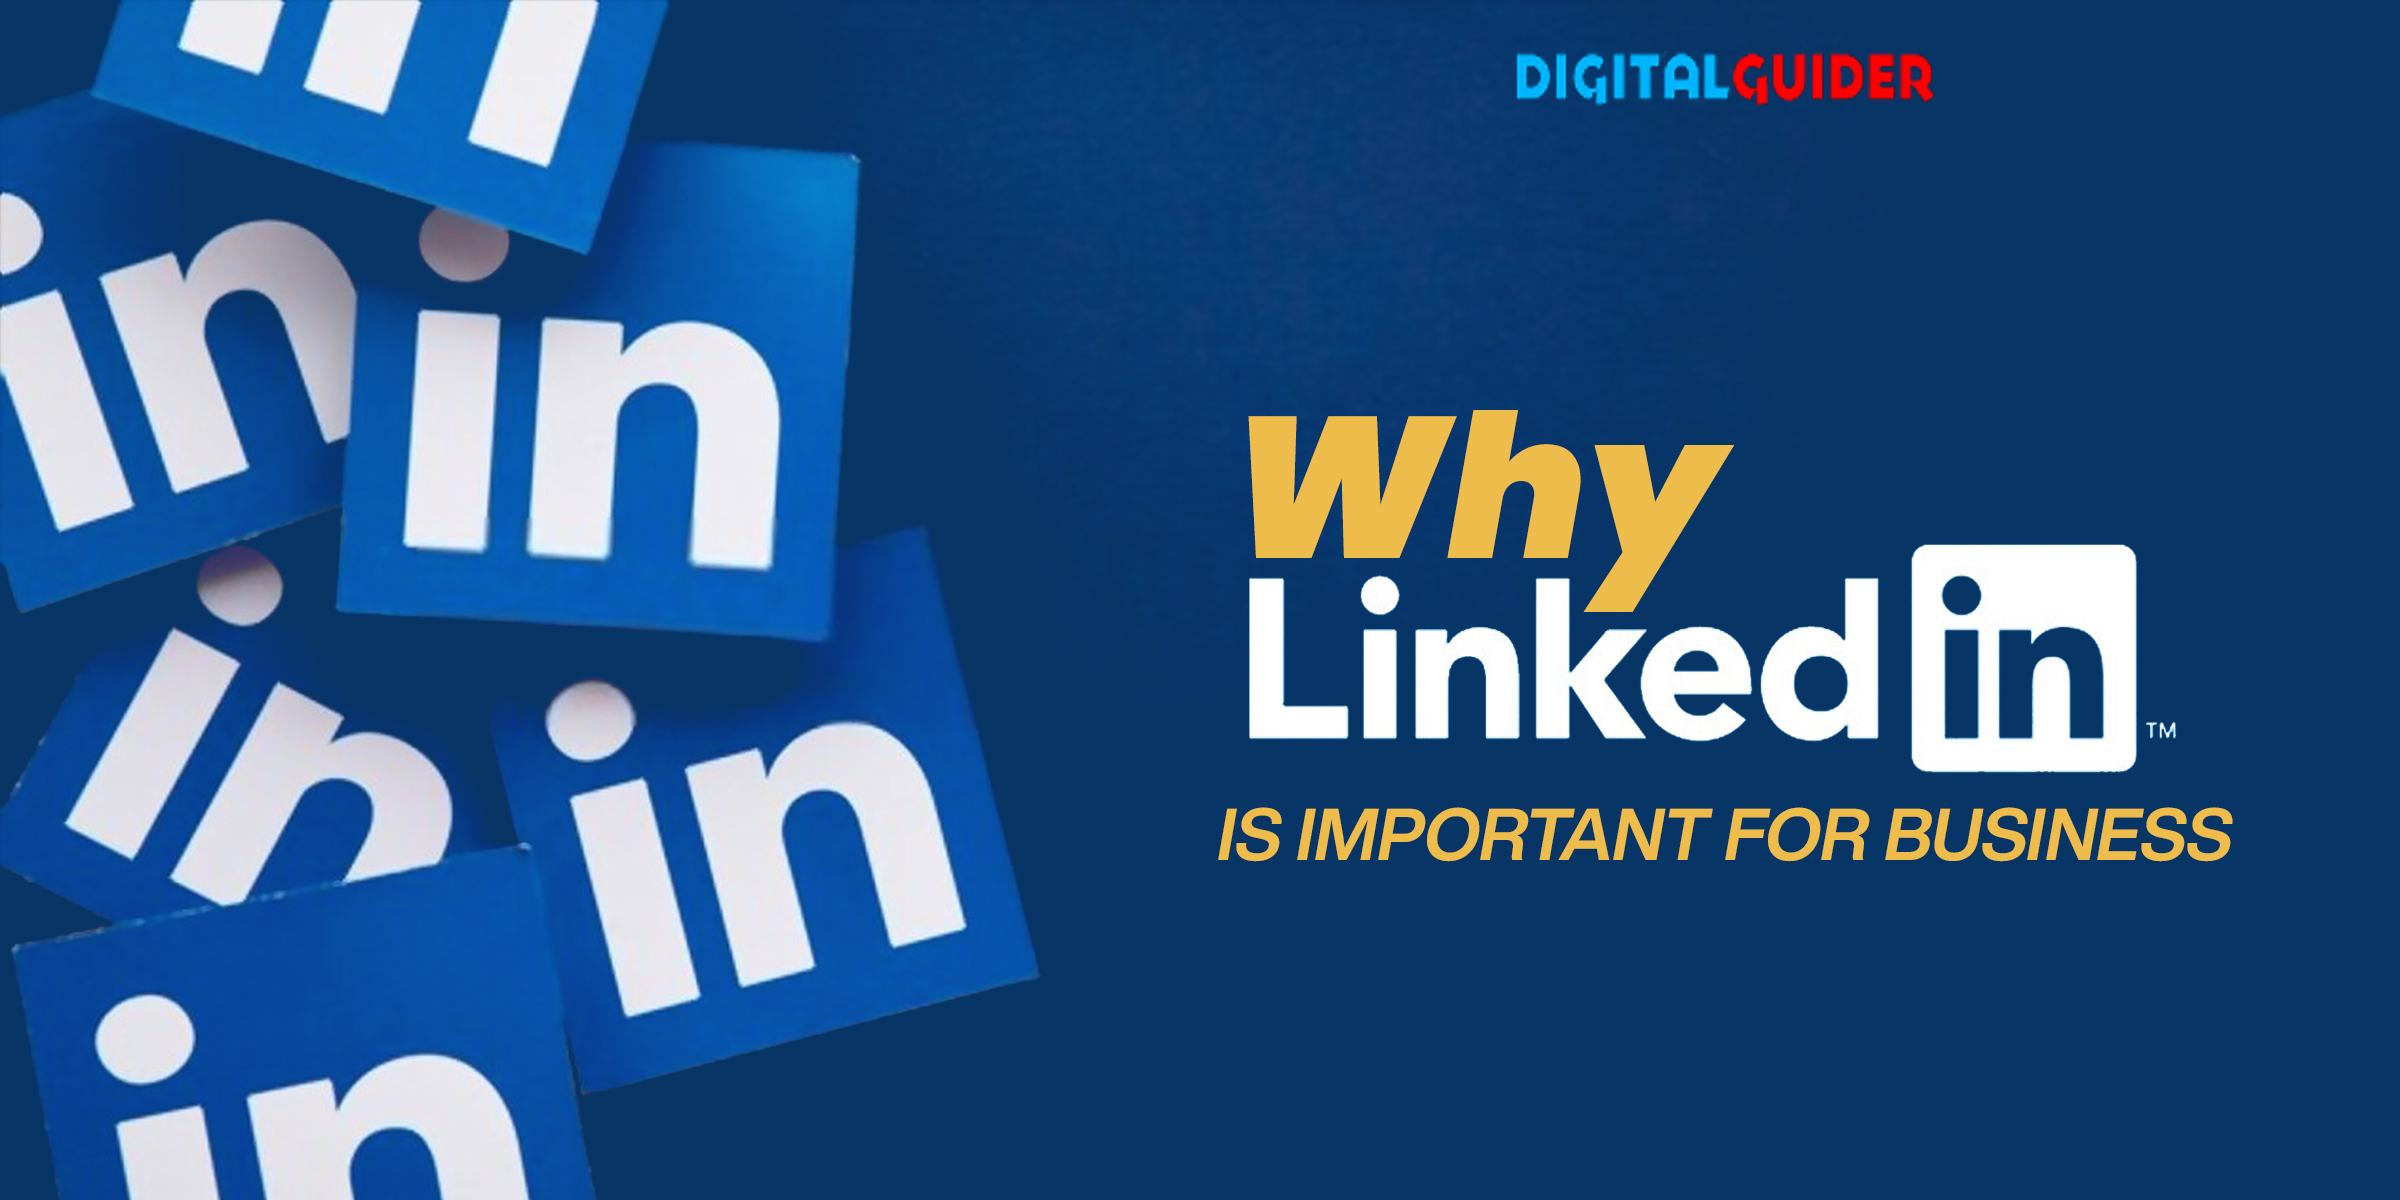 Why linked in is important for business